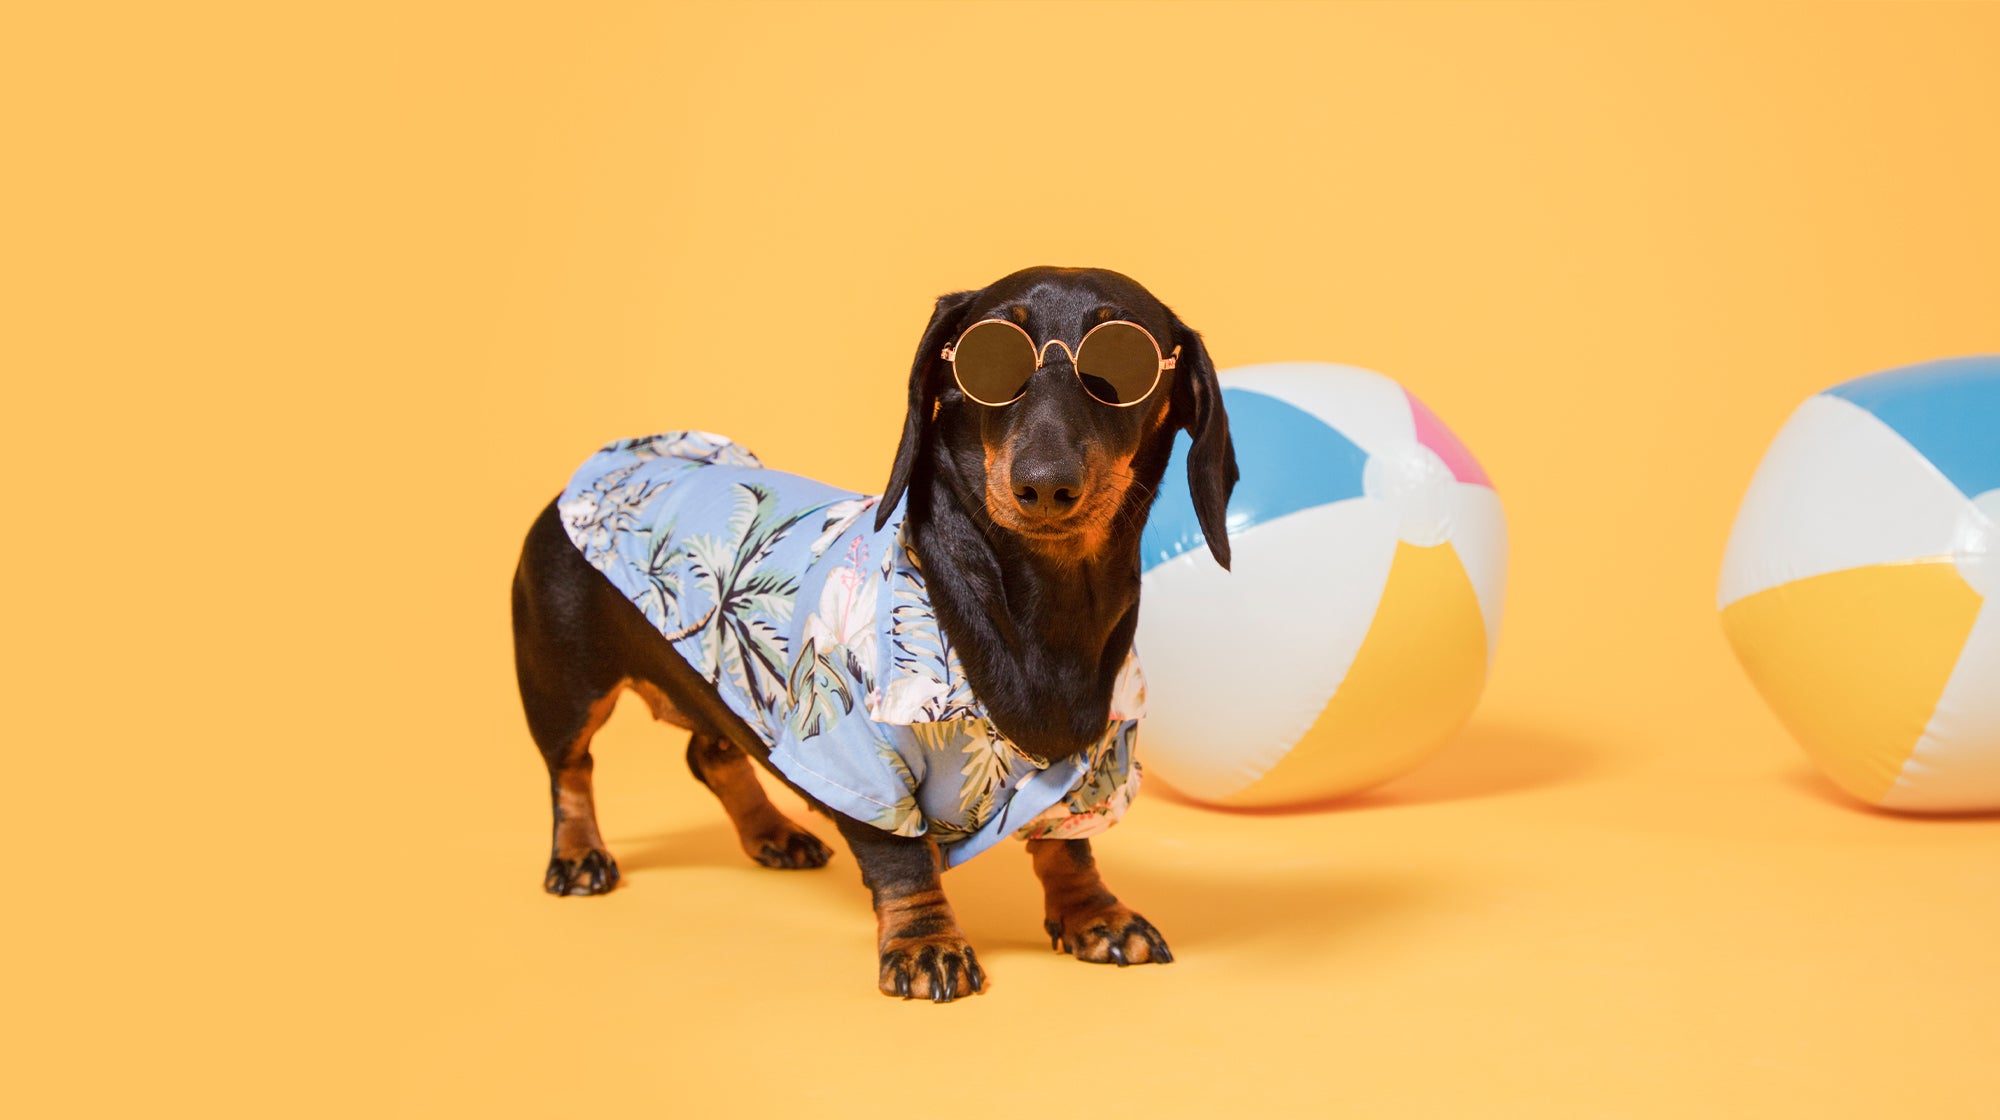 A dachshund dog with a Hawaiian shirt on, with beach balls, against a yellow background